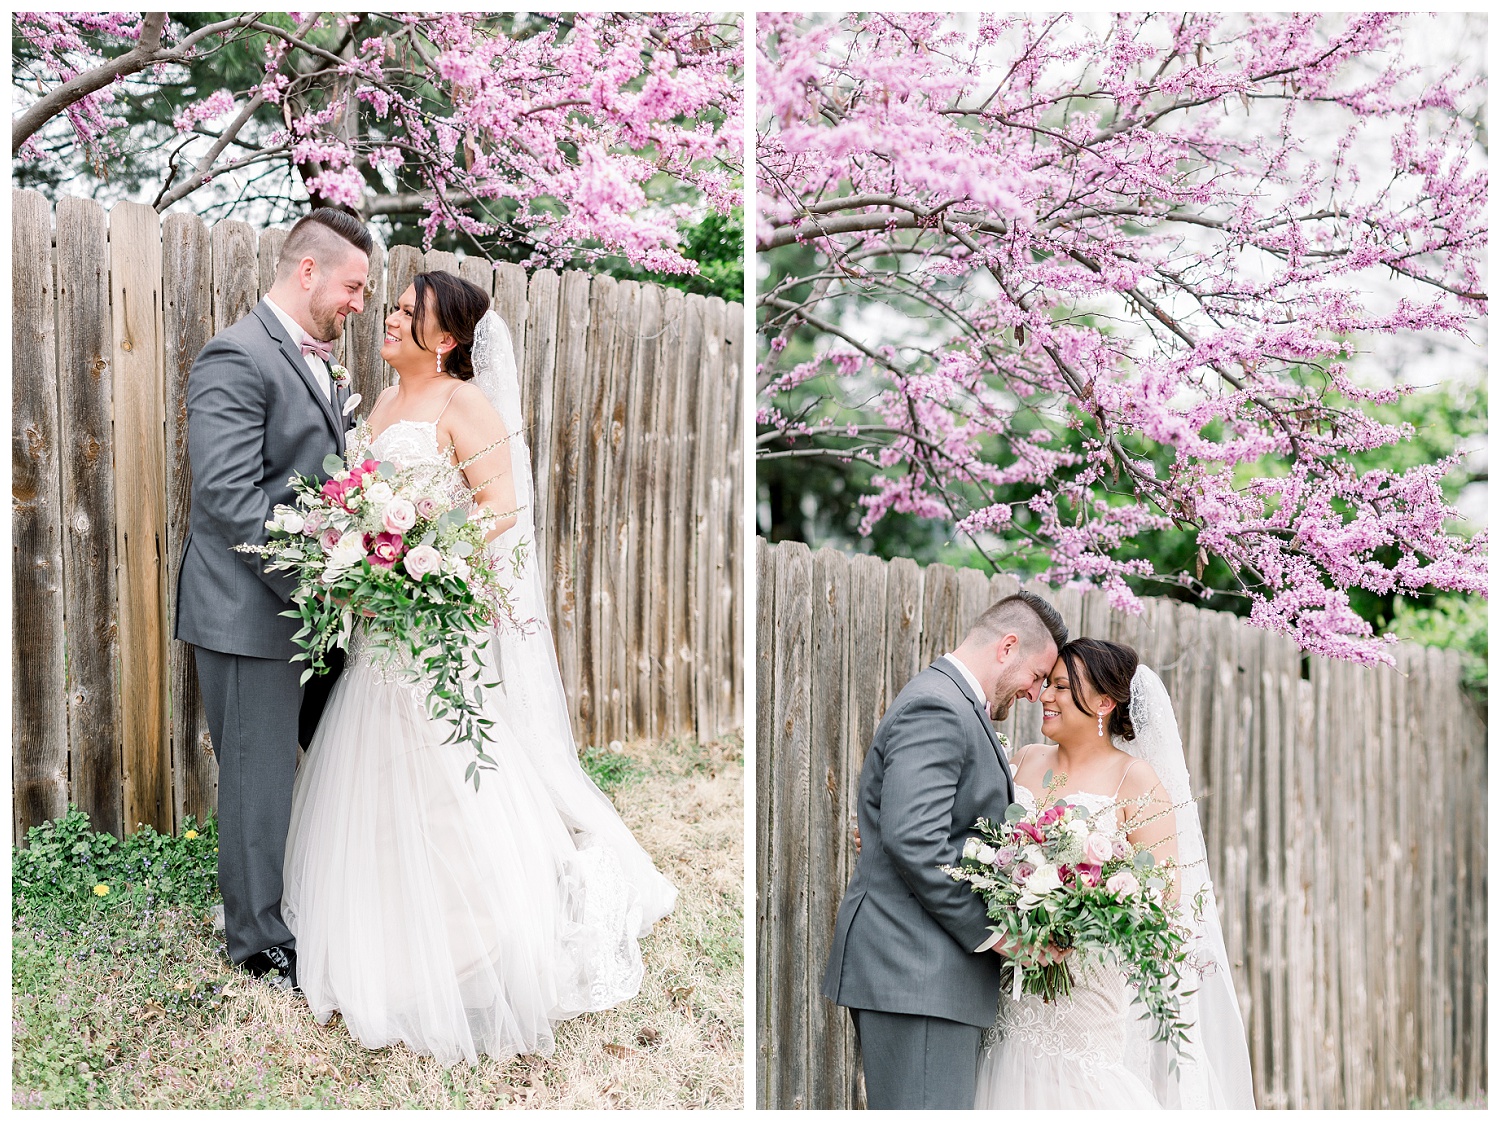 Colorful spring wedding photography inspiration